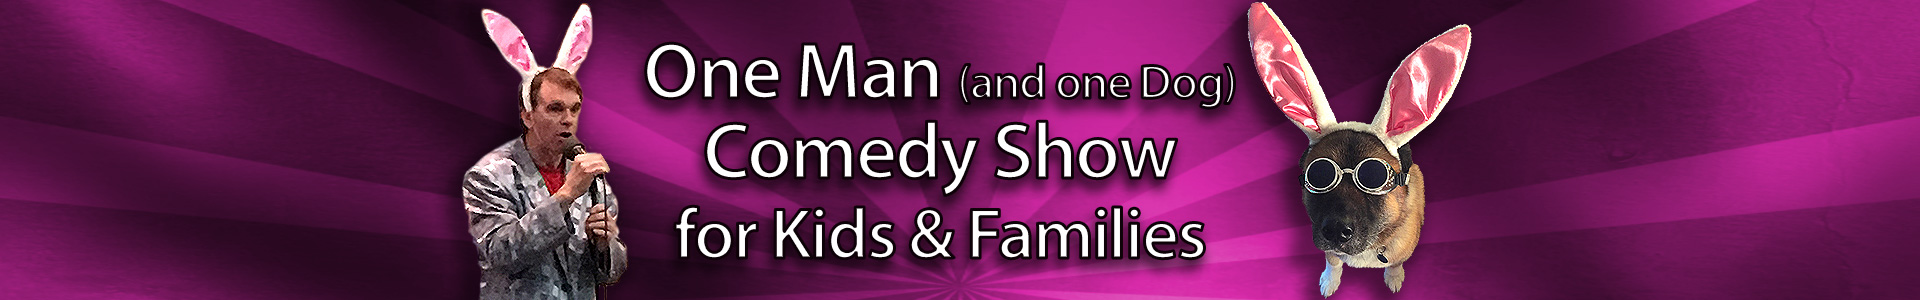 One Man (and One Dog) Comedy Show for Kids & Families